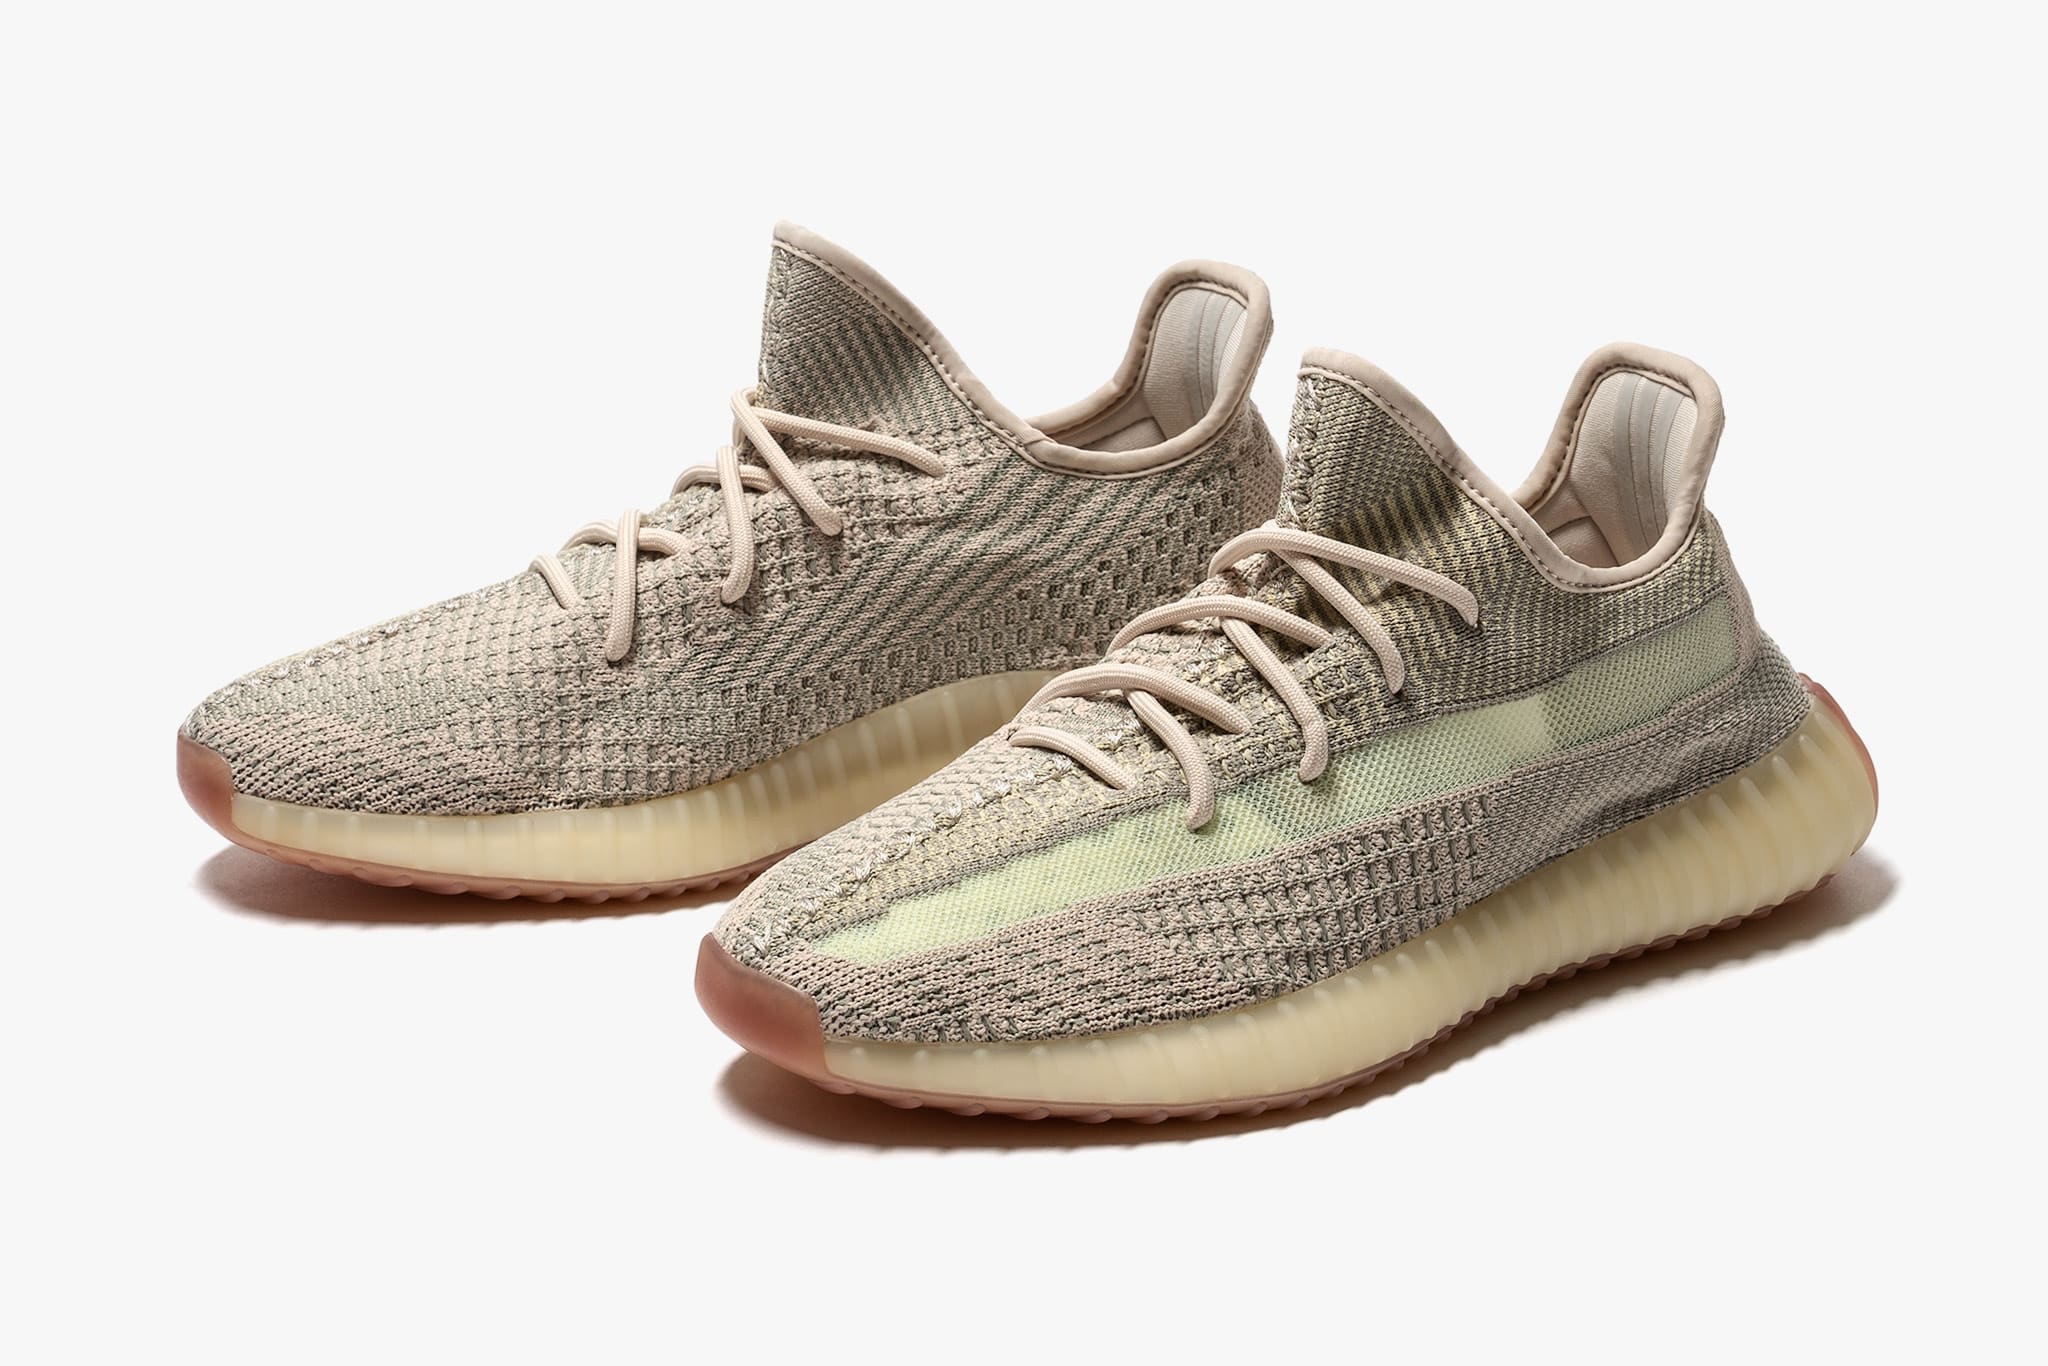 adidas Yeezy Boost 350 V2 'Citrin' | Release Date: 09.23.19 | HAVEN